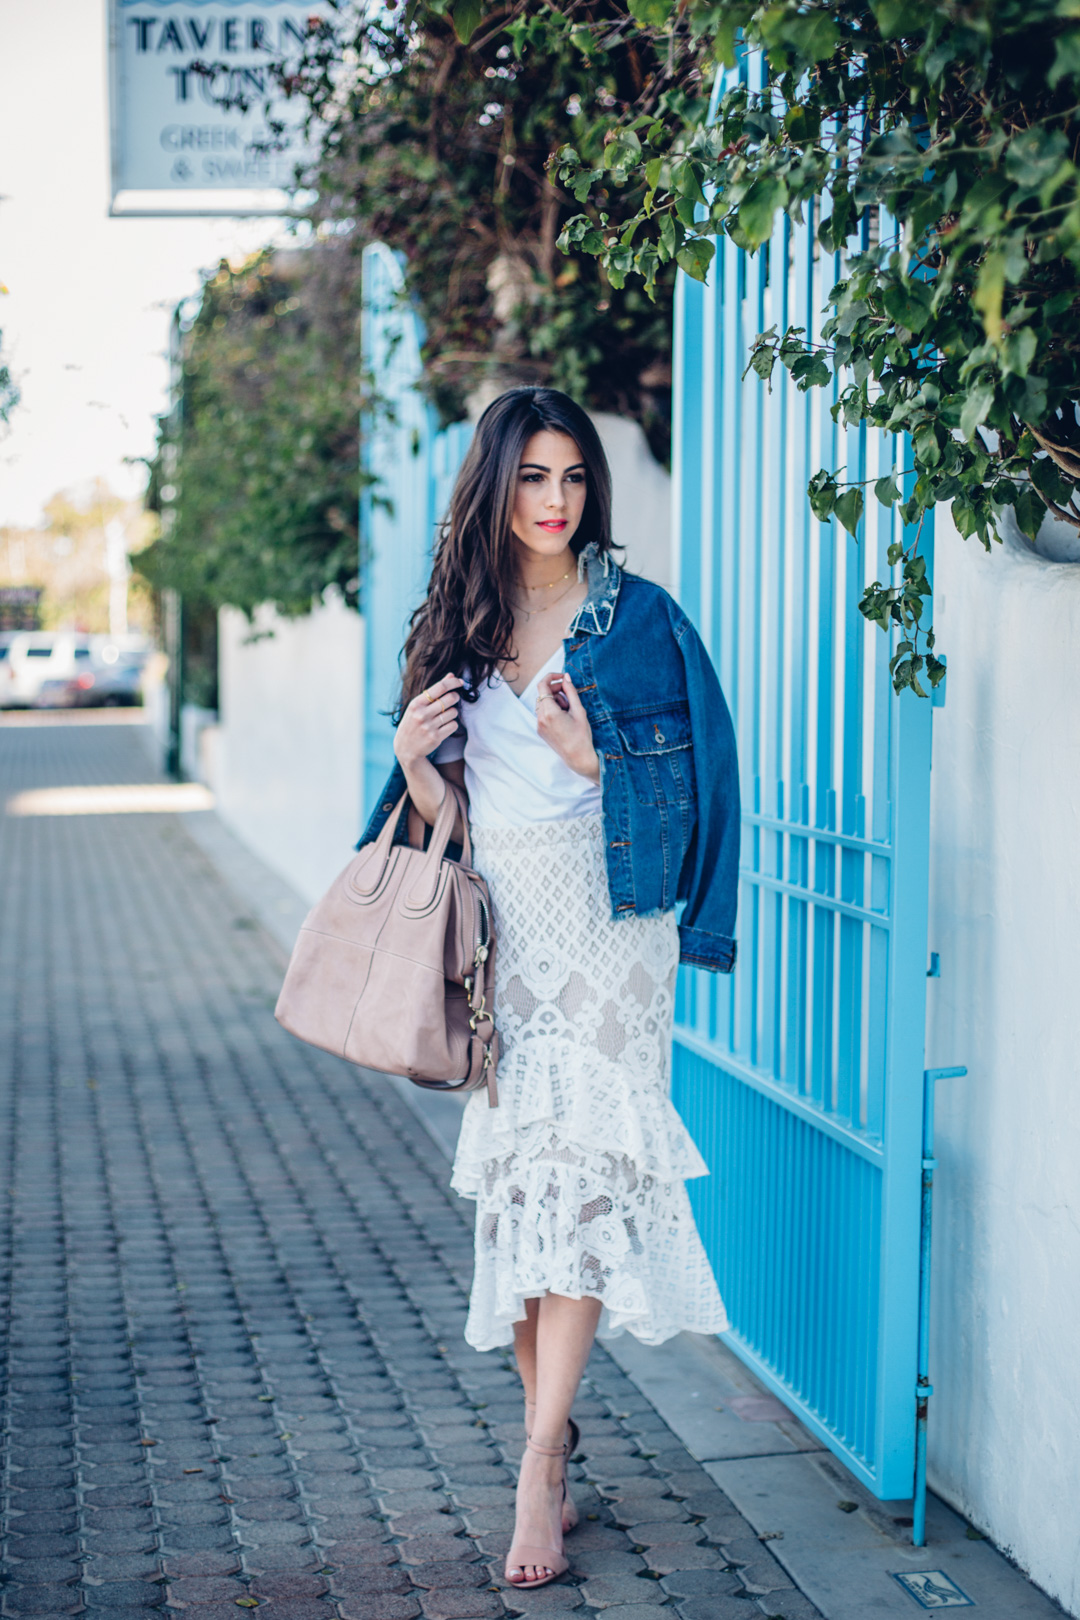 Jackie Roque styling a spring look in Malibu, wearing Trouve Surplice Cold Shoulder Bodysuit and a Market Miami denim jacket.